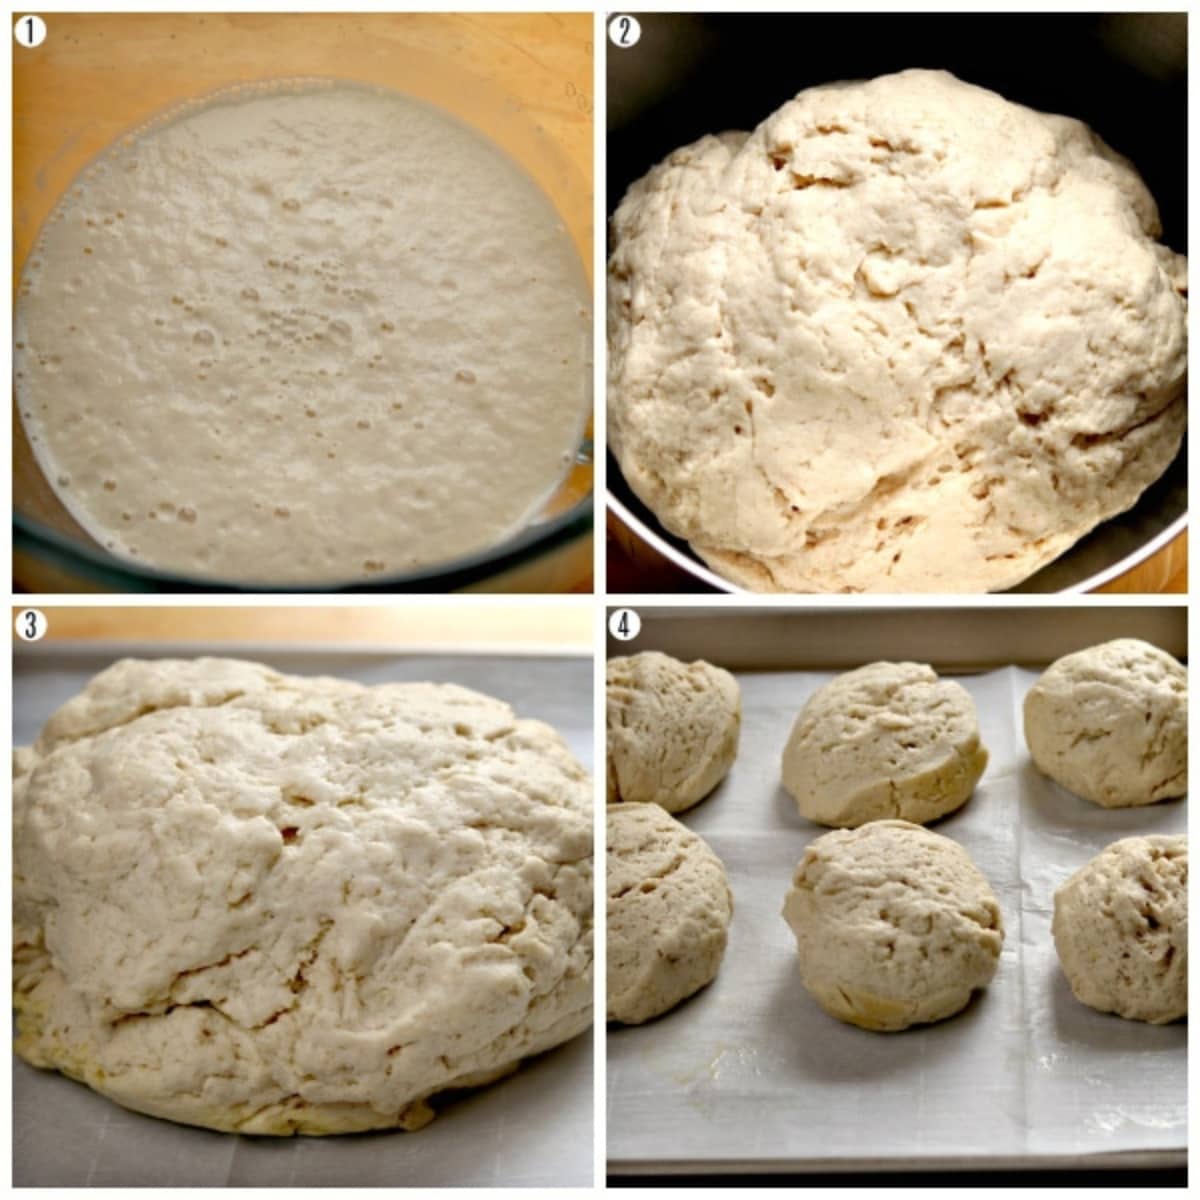 gluten-free bagels recipe steps 1-4 for making the bagel dough